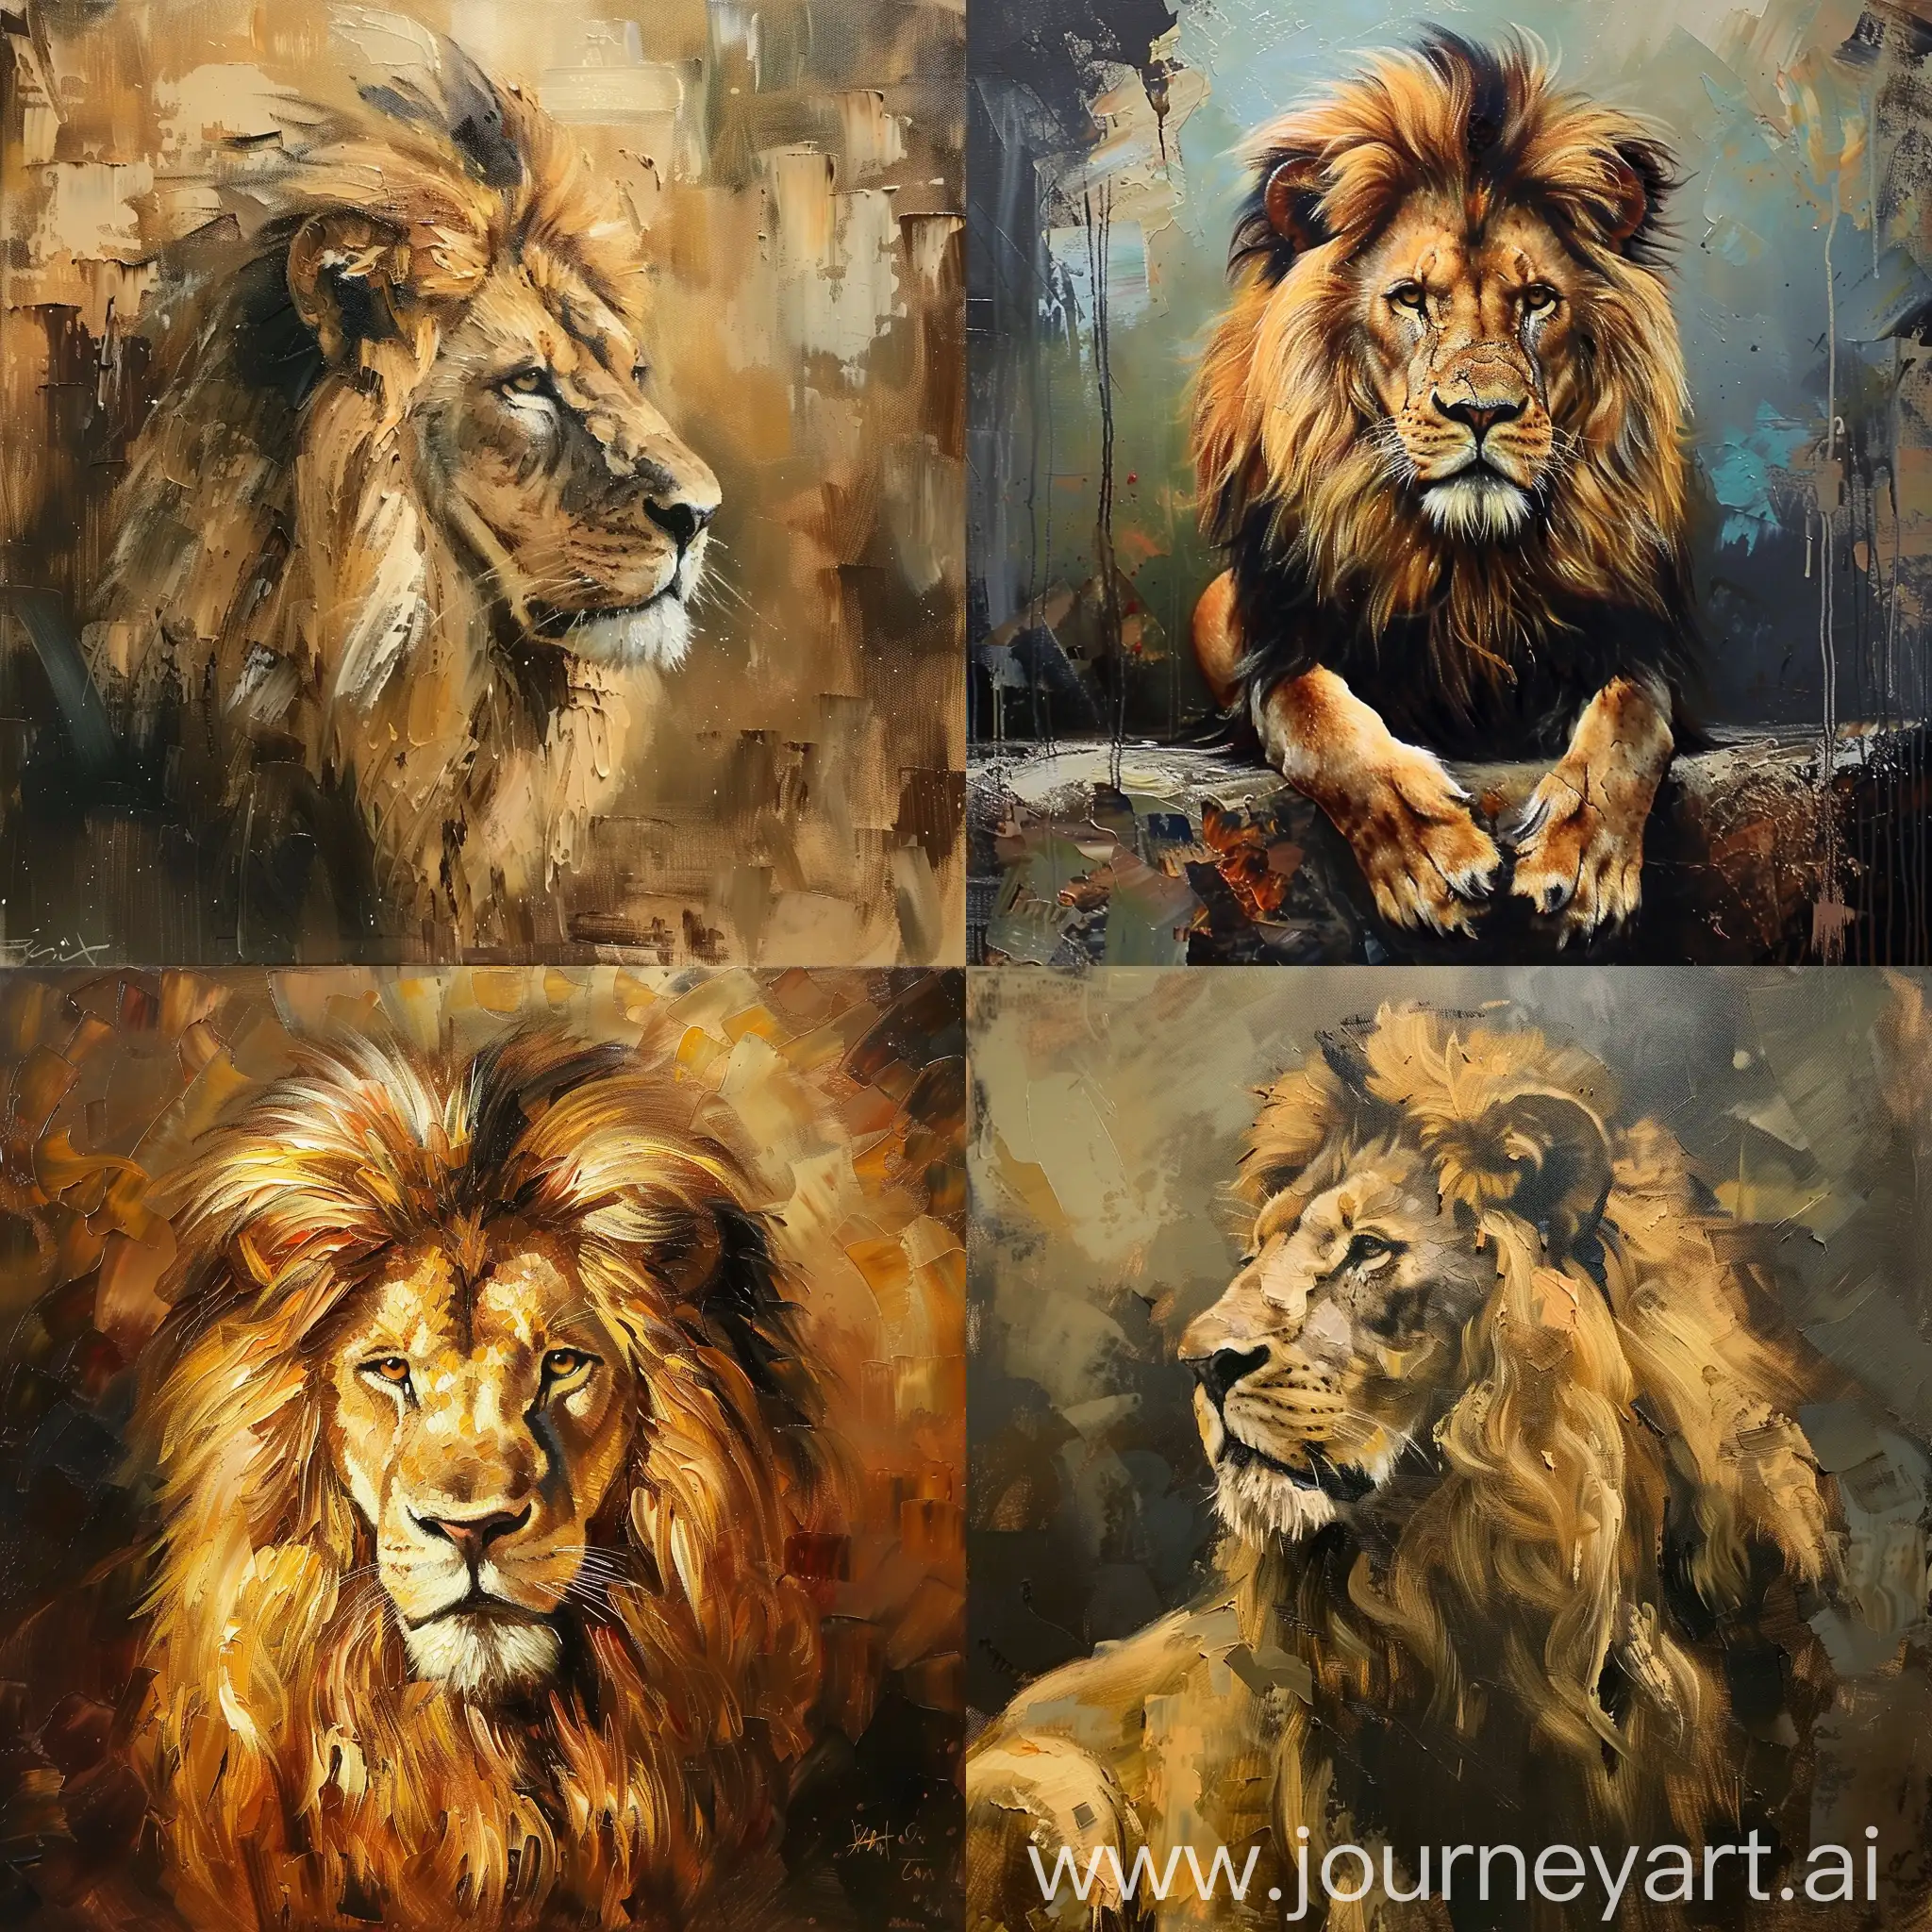 Majestic-Lion-Portrait-in-Vibrant-Oil-Painting-Style